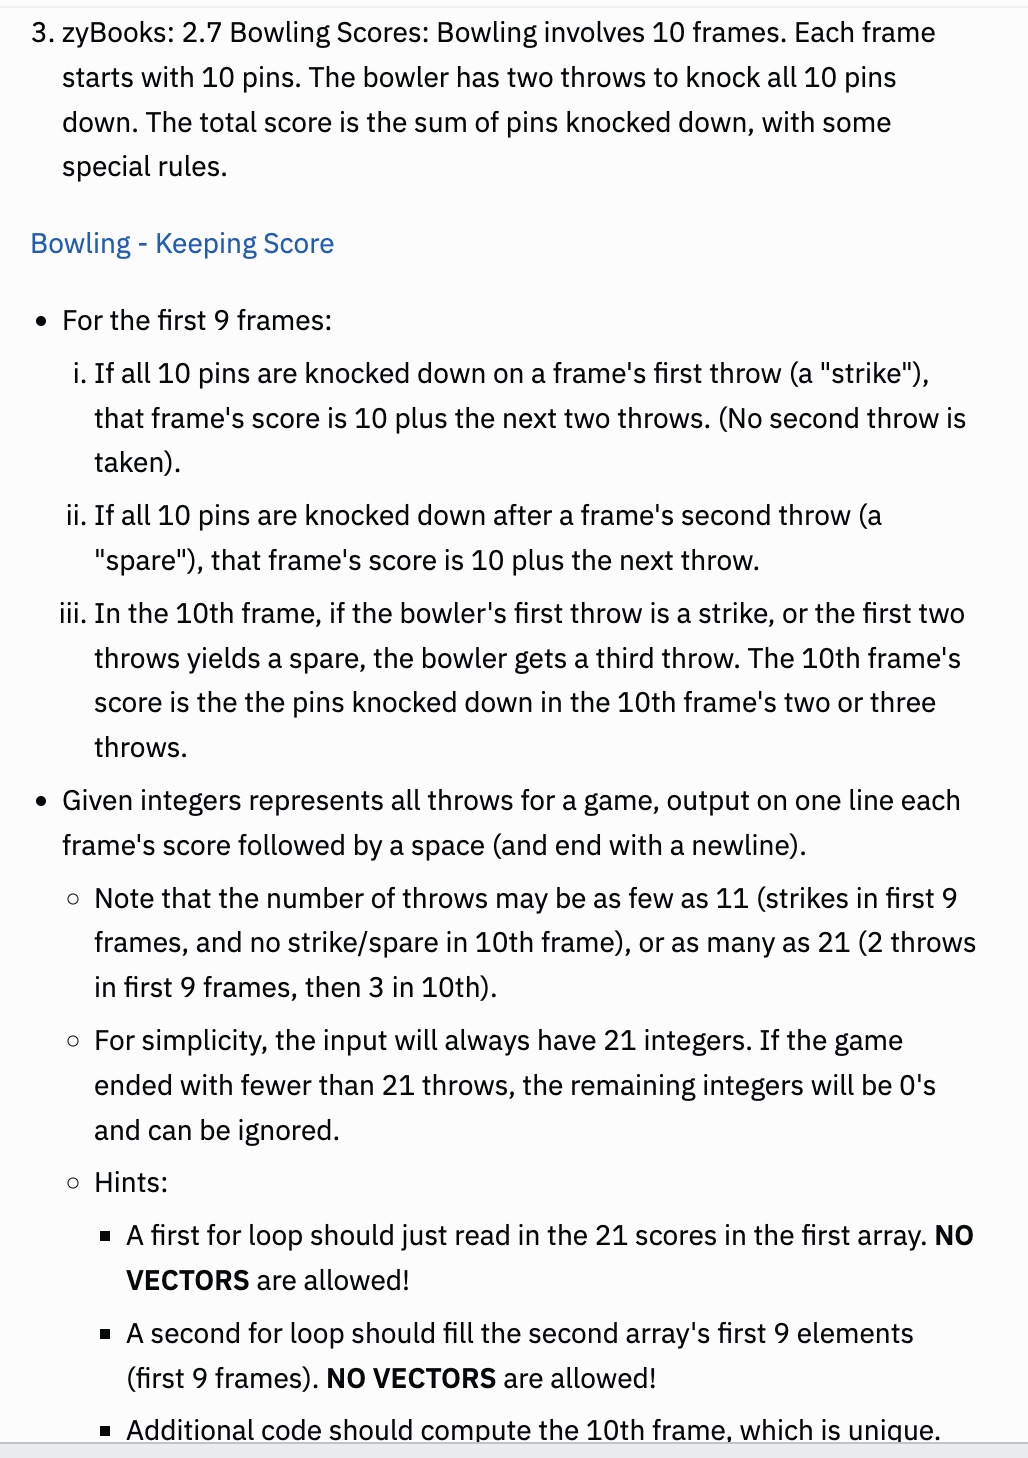 3. zyBooks: 2.7 Bowling Scores: Bowling involves 10 frames. Each frame
starts with 10 pins. The bowler has two throws to knock all 10 pins
down. The total score is the sum of pins knocked down, with some
special rules.
Bowling - Keeping Score
• For the first 9 frames:
i. If all 10 pins are knocked down on a frame's first throw (a "strike"),
that frame's score is 10 plus the next two throws. (No second throw is
taker
ii. If all 10 pins are knocked down after a frame's second throw (a
"spare"), that frame's score is 10 plus the next throw.
iii. In the 10th frame, if the bowler's first throw is a strike, or the first two
throws yields a spare, the bowler gets a third throw. The 10th frame's
score is the the pins knocked down in the 10th frame's two or three
throws.
• Given integers represents all throws for a game, output on one line each
frame's score followed by a space (and end with a newline).
o Note that the number of throws may be as few as 11 (strikes in first 9
frames, and no strike/spare in 10th frame), or as many as 21 (2 throws
in first 9 frames, then 3 in 10th).
o For simplicity, the input will always have 21 integers. If the game
ended with fewer than 21 throws, the remaining integers will be O's
and can be ignored.
o Hints:
▪ A first for loop should just read in the 21 scores in the first array. NO
VECTORS are allowed!
■ A second for loop should fill the second array's first 9 elements
(first 9 frames). NO VECTORS are allowed!
■ Additional code should compute the 10th frame, which is unique.